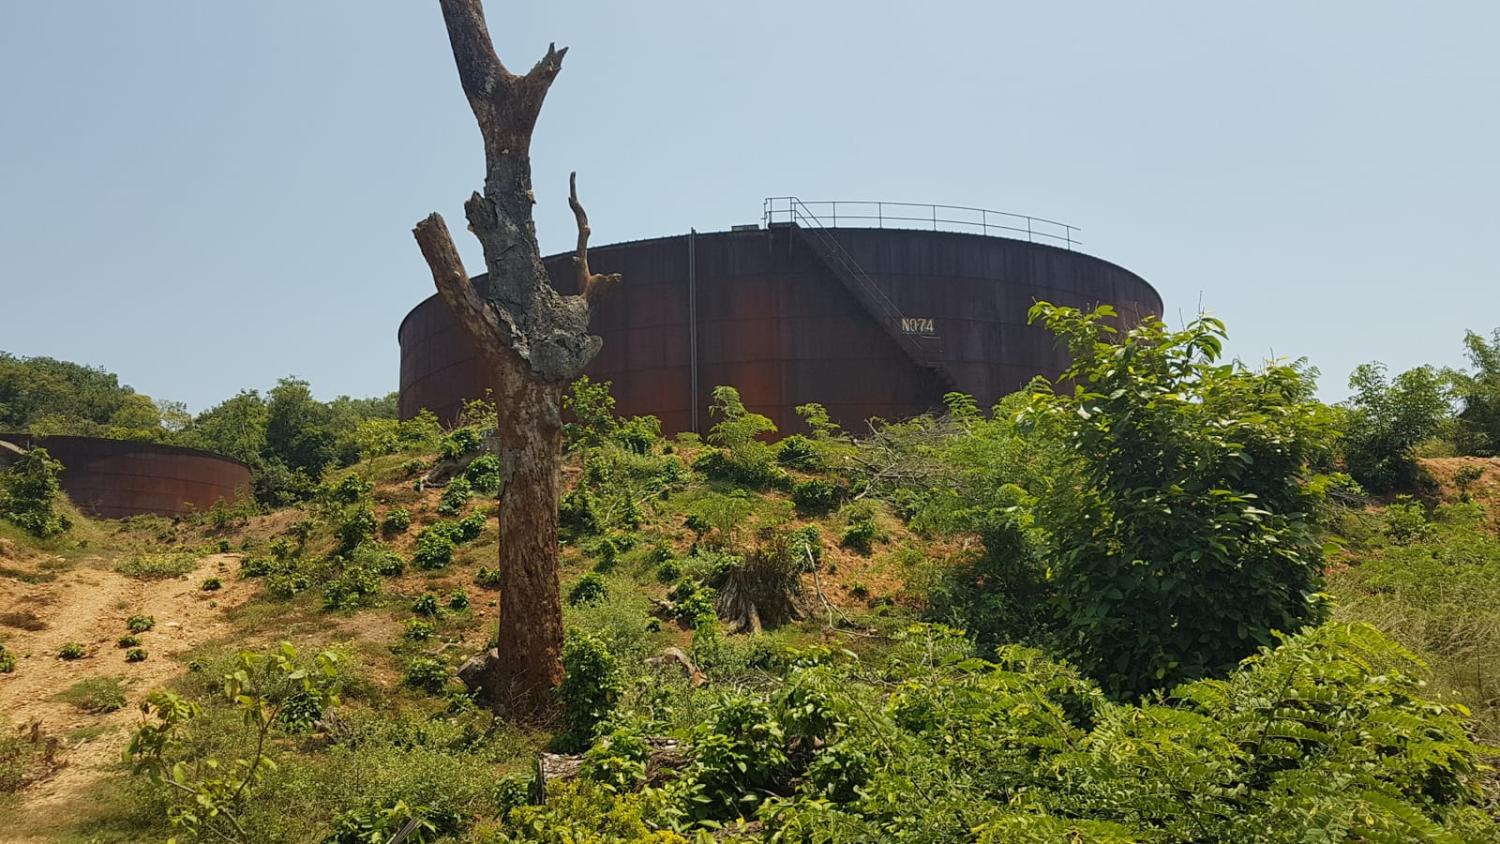 One of the giant oil tanks with the jungle encroaching at Trincomalee Oil Tank Farm in Sri Lanka's east (David Brewster)